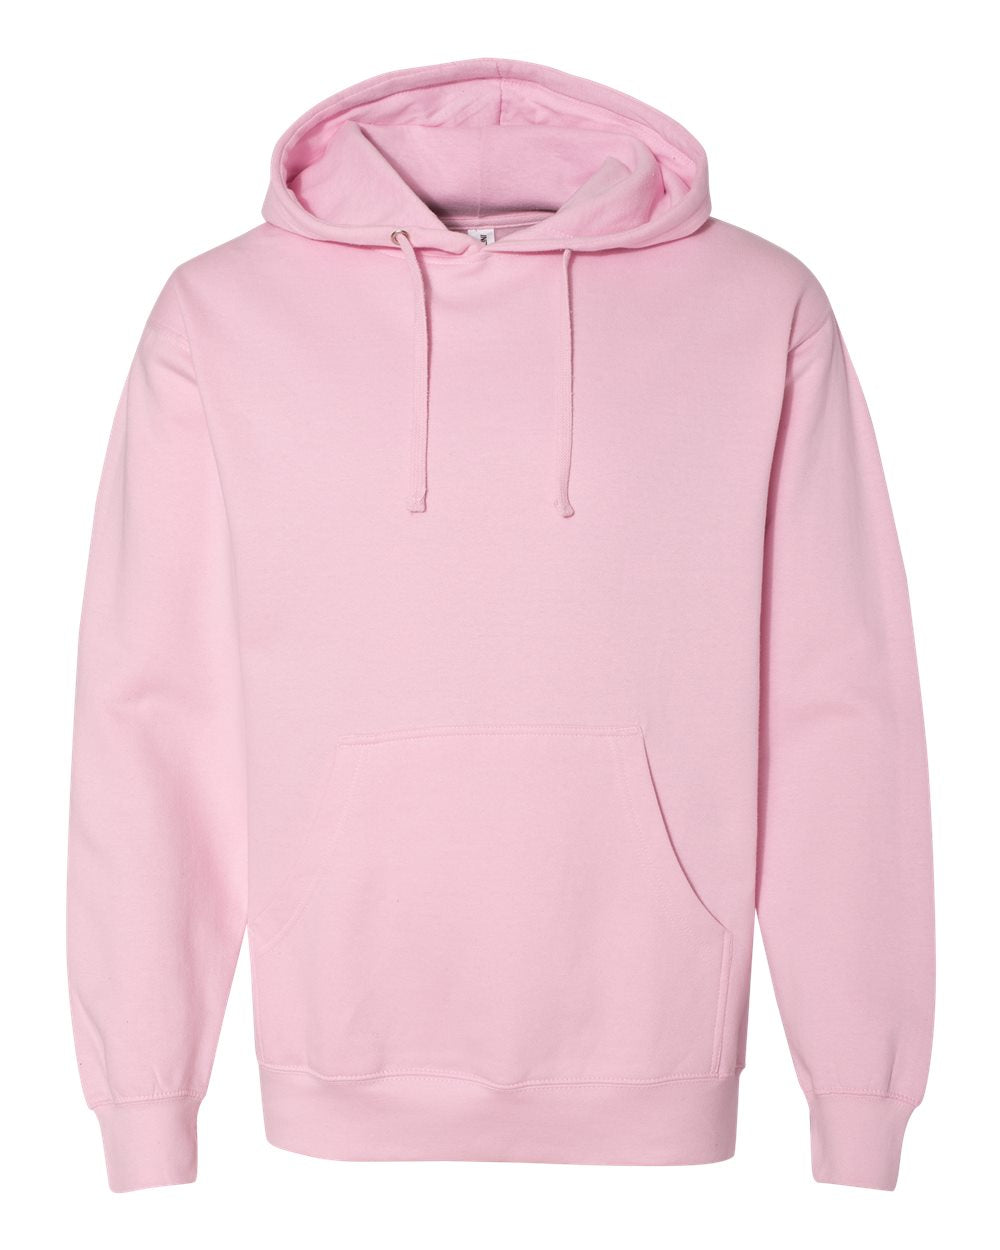 Independent Trading Co. Midweight Hooded Sweatshirt SS4500 #color_Light Pink